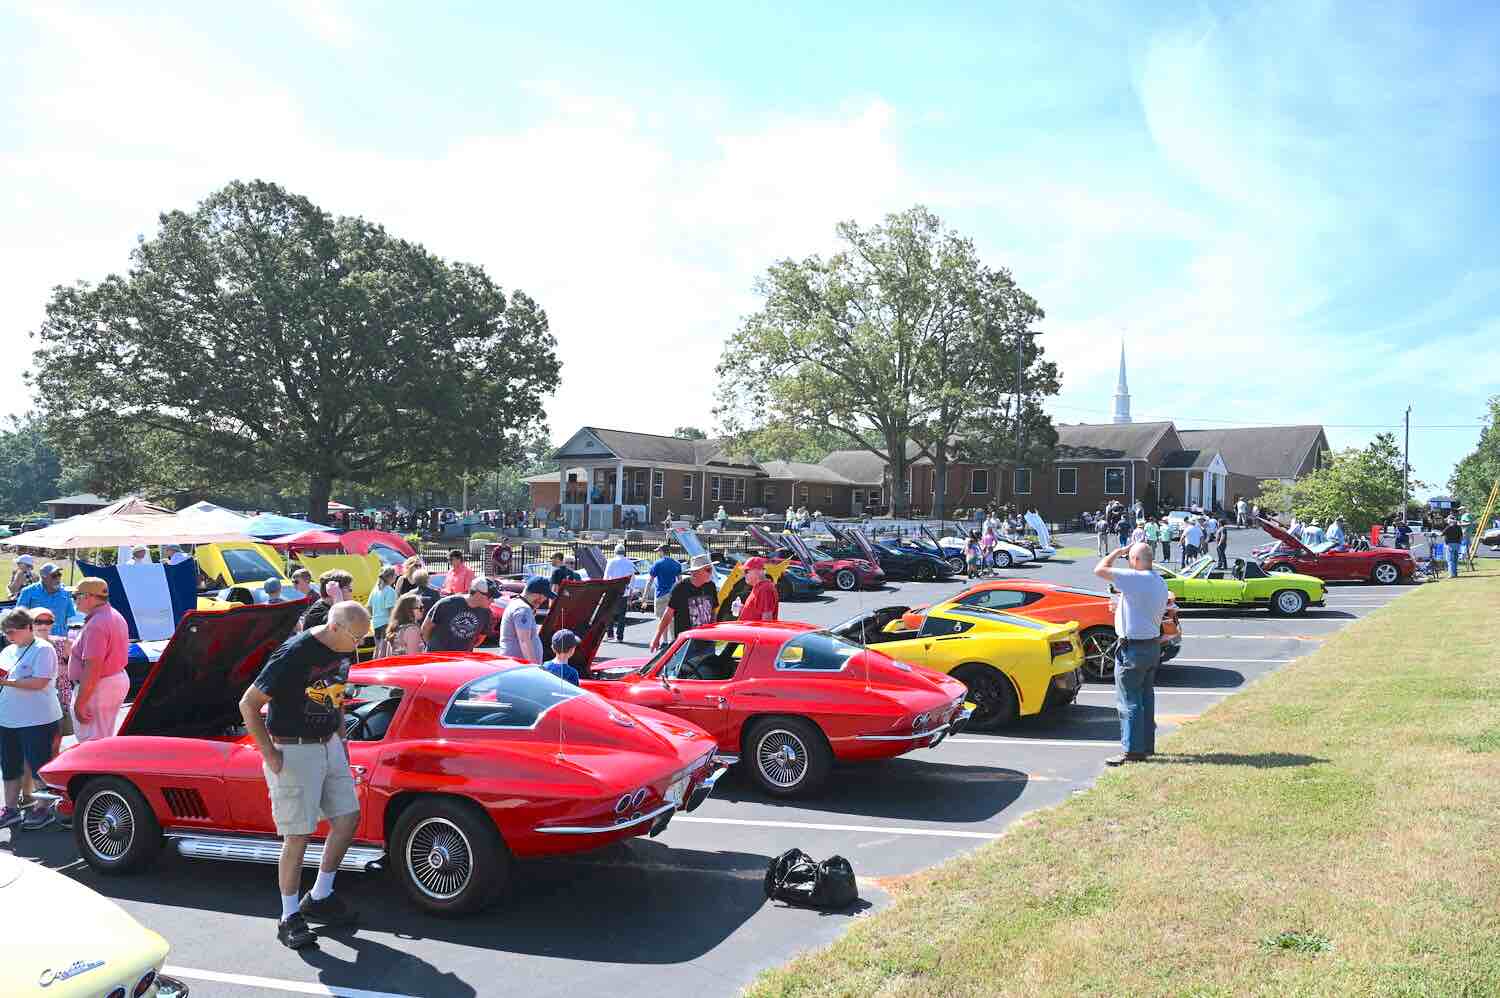 Car enthusiasts and excited kids wandered among more than 1220 vintage cars June 4 at the Flat Creek Car Show. Photo/Roger Alford/The Georgia Index.